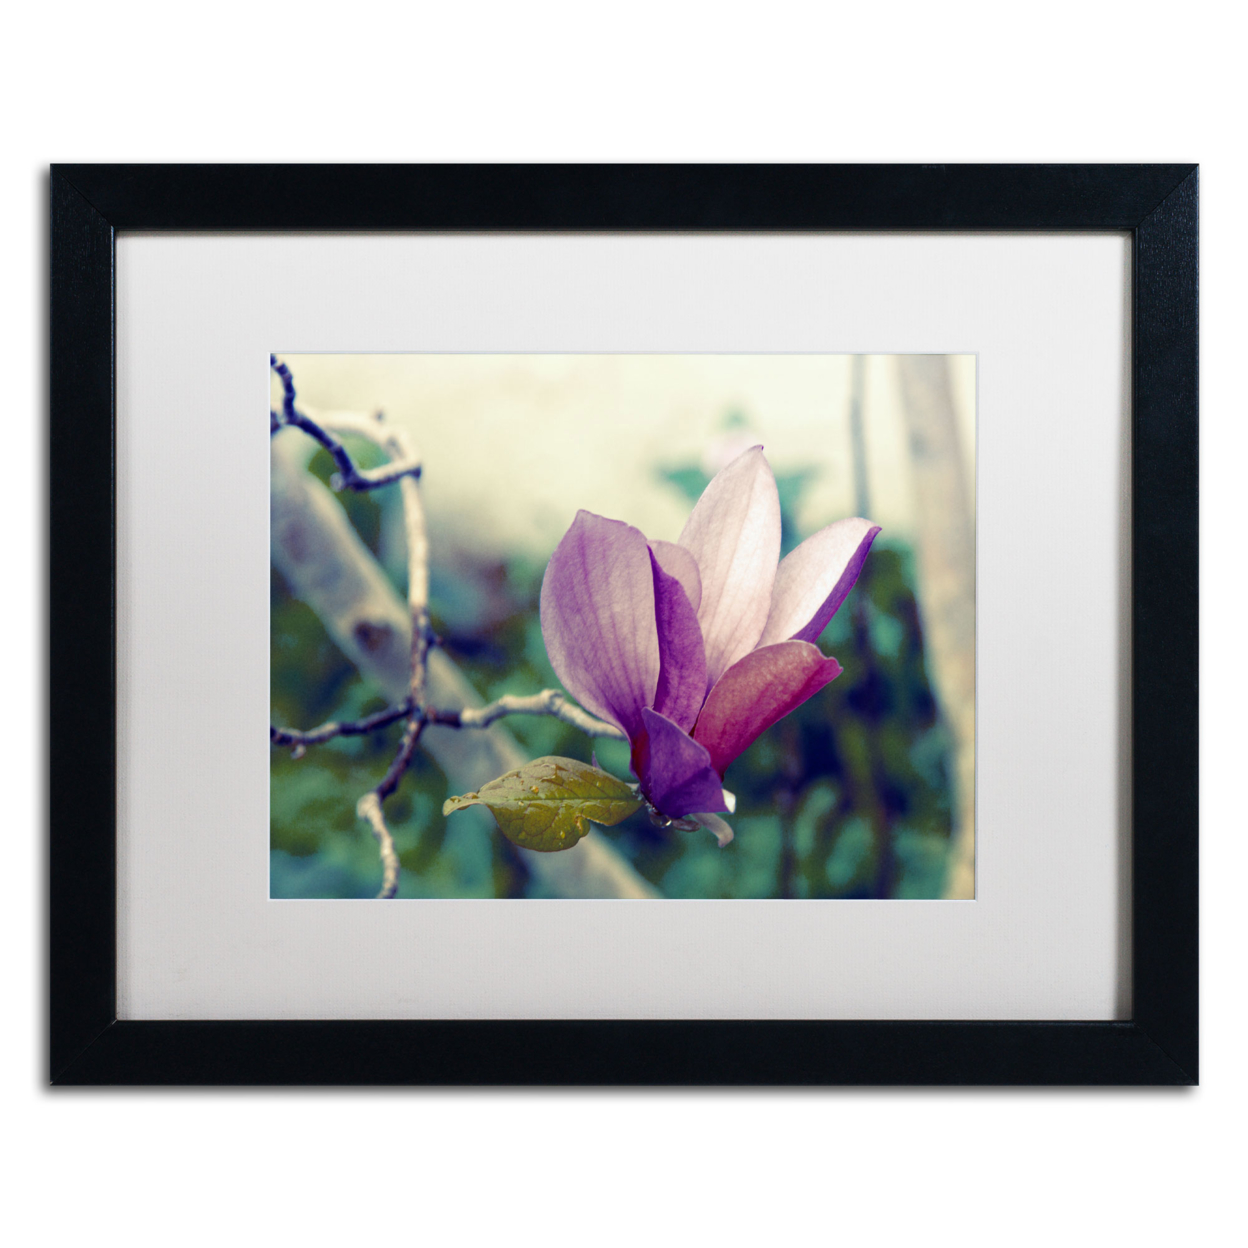 Patty Tuggle 'Pink Magnolia' Black Wooden Framed Art 18 X 22 Inches